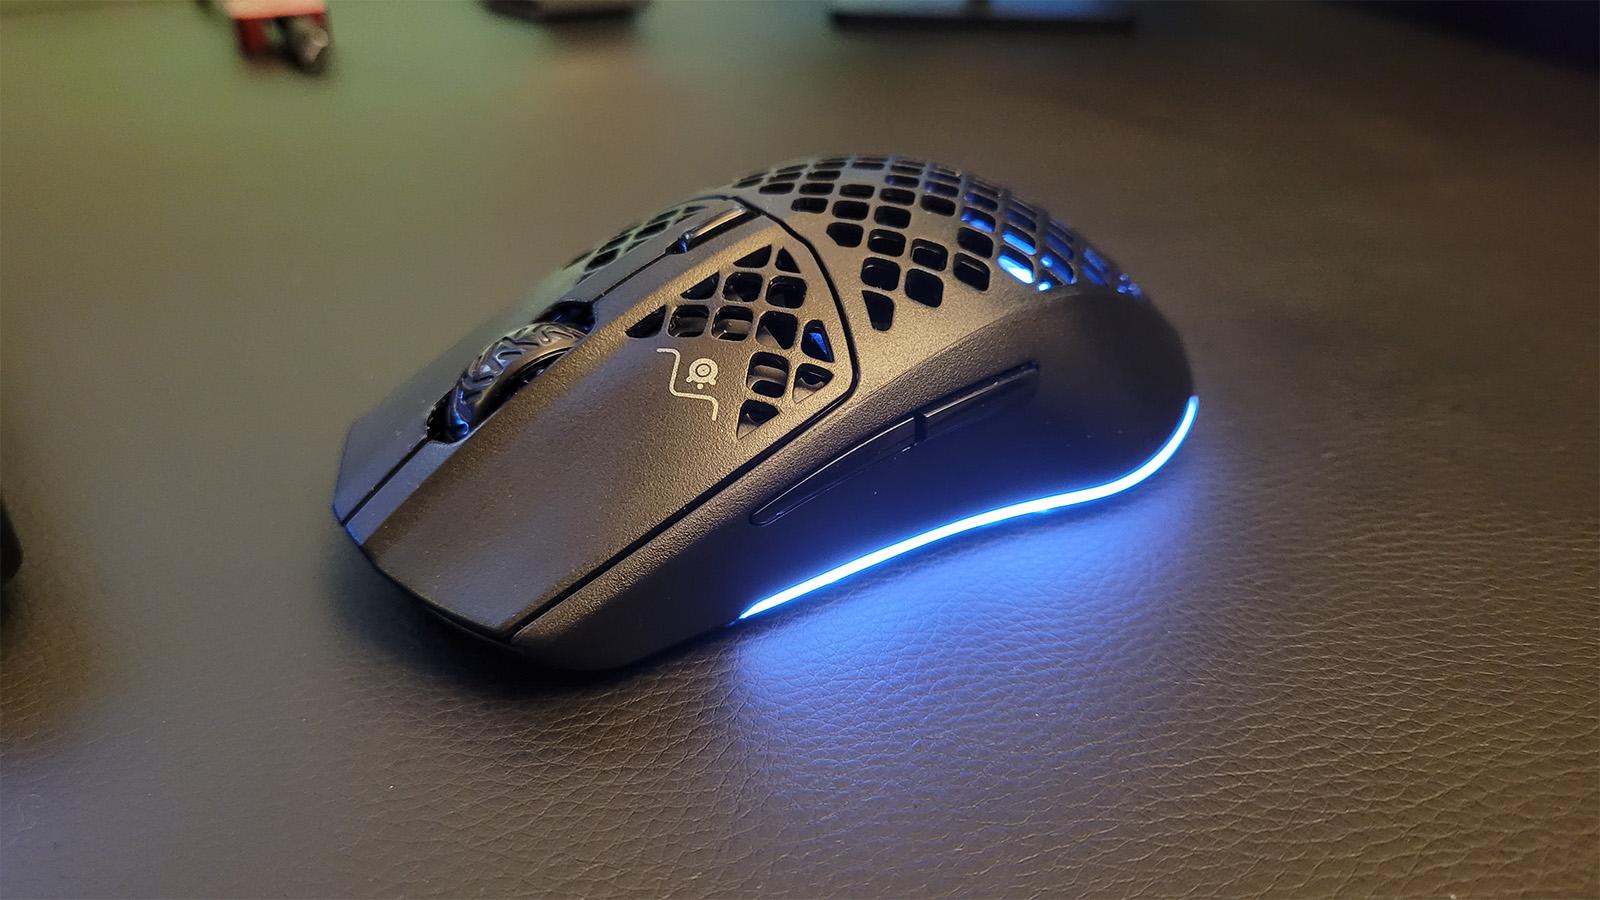 fantastic SteelSeries review: 3 mouse budget - A Wireless Aerox gaming Dexerto